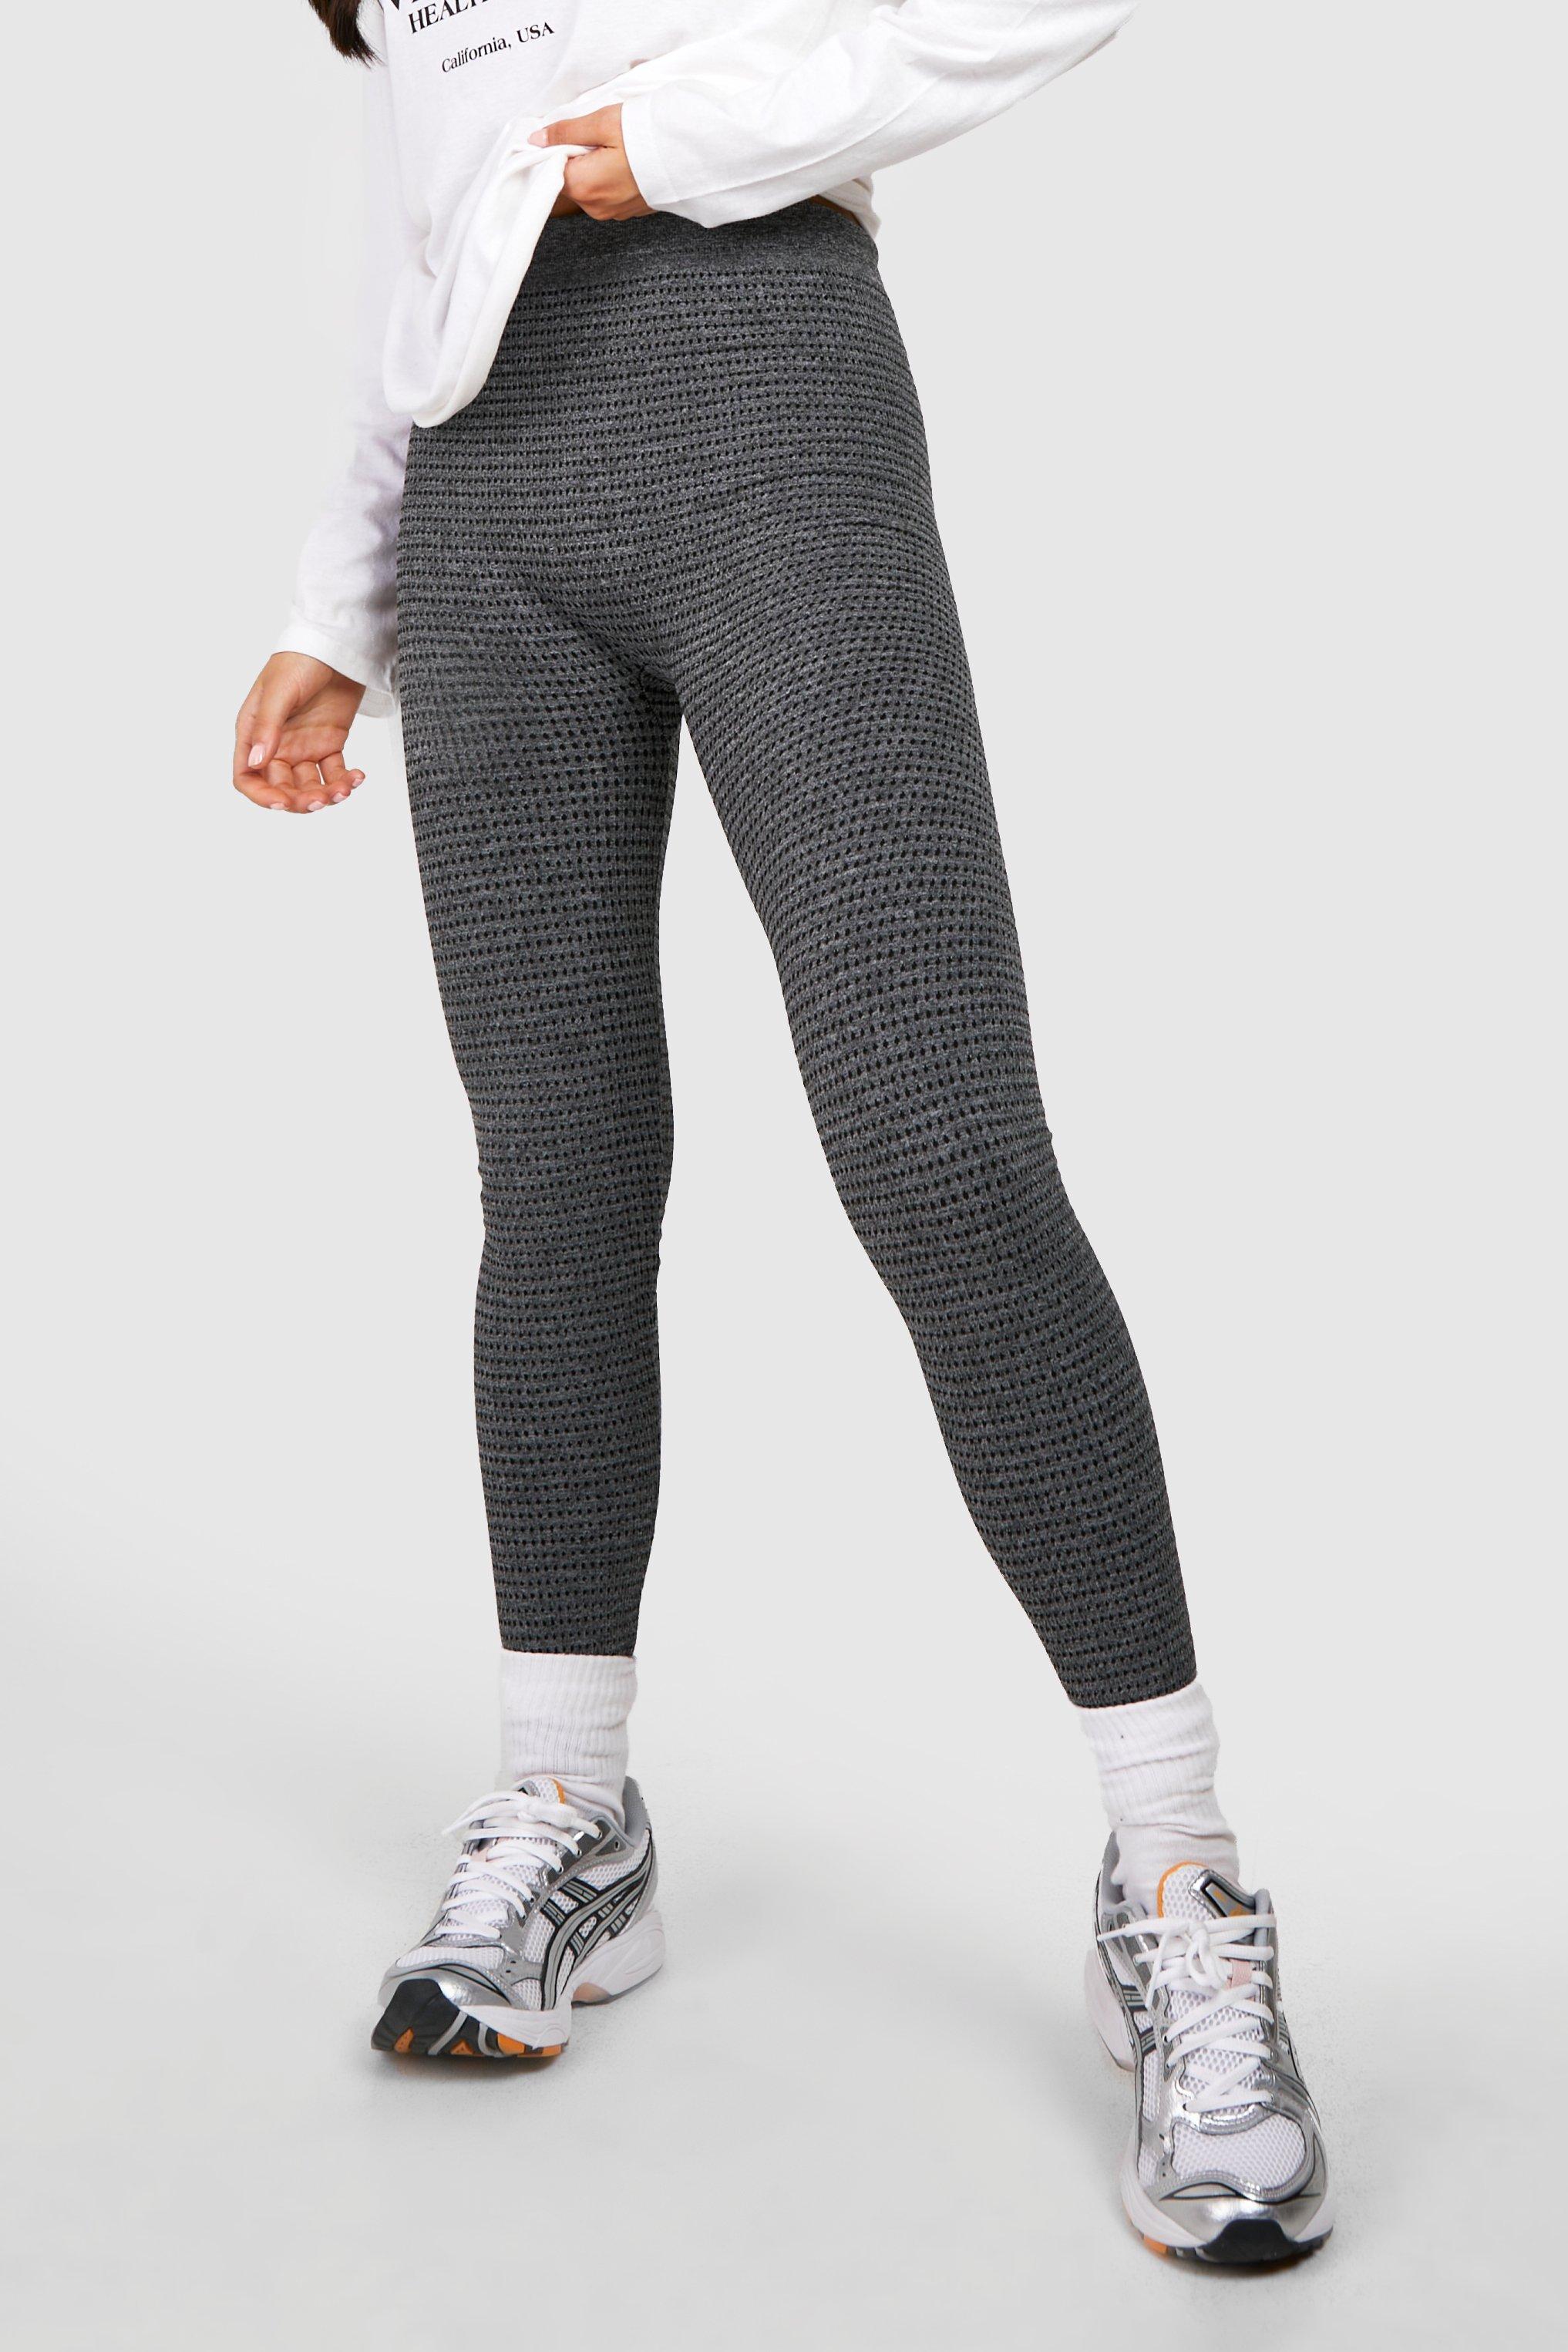 A New Day Women's Waffle Knit Leggings with Drawstring Soft